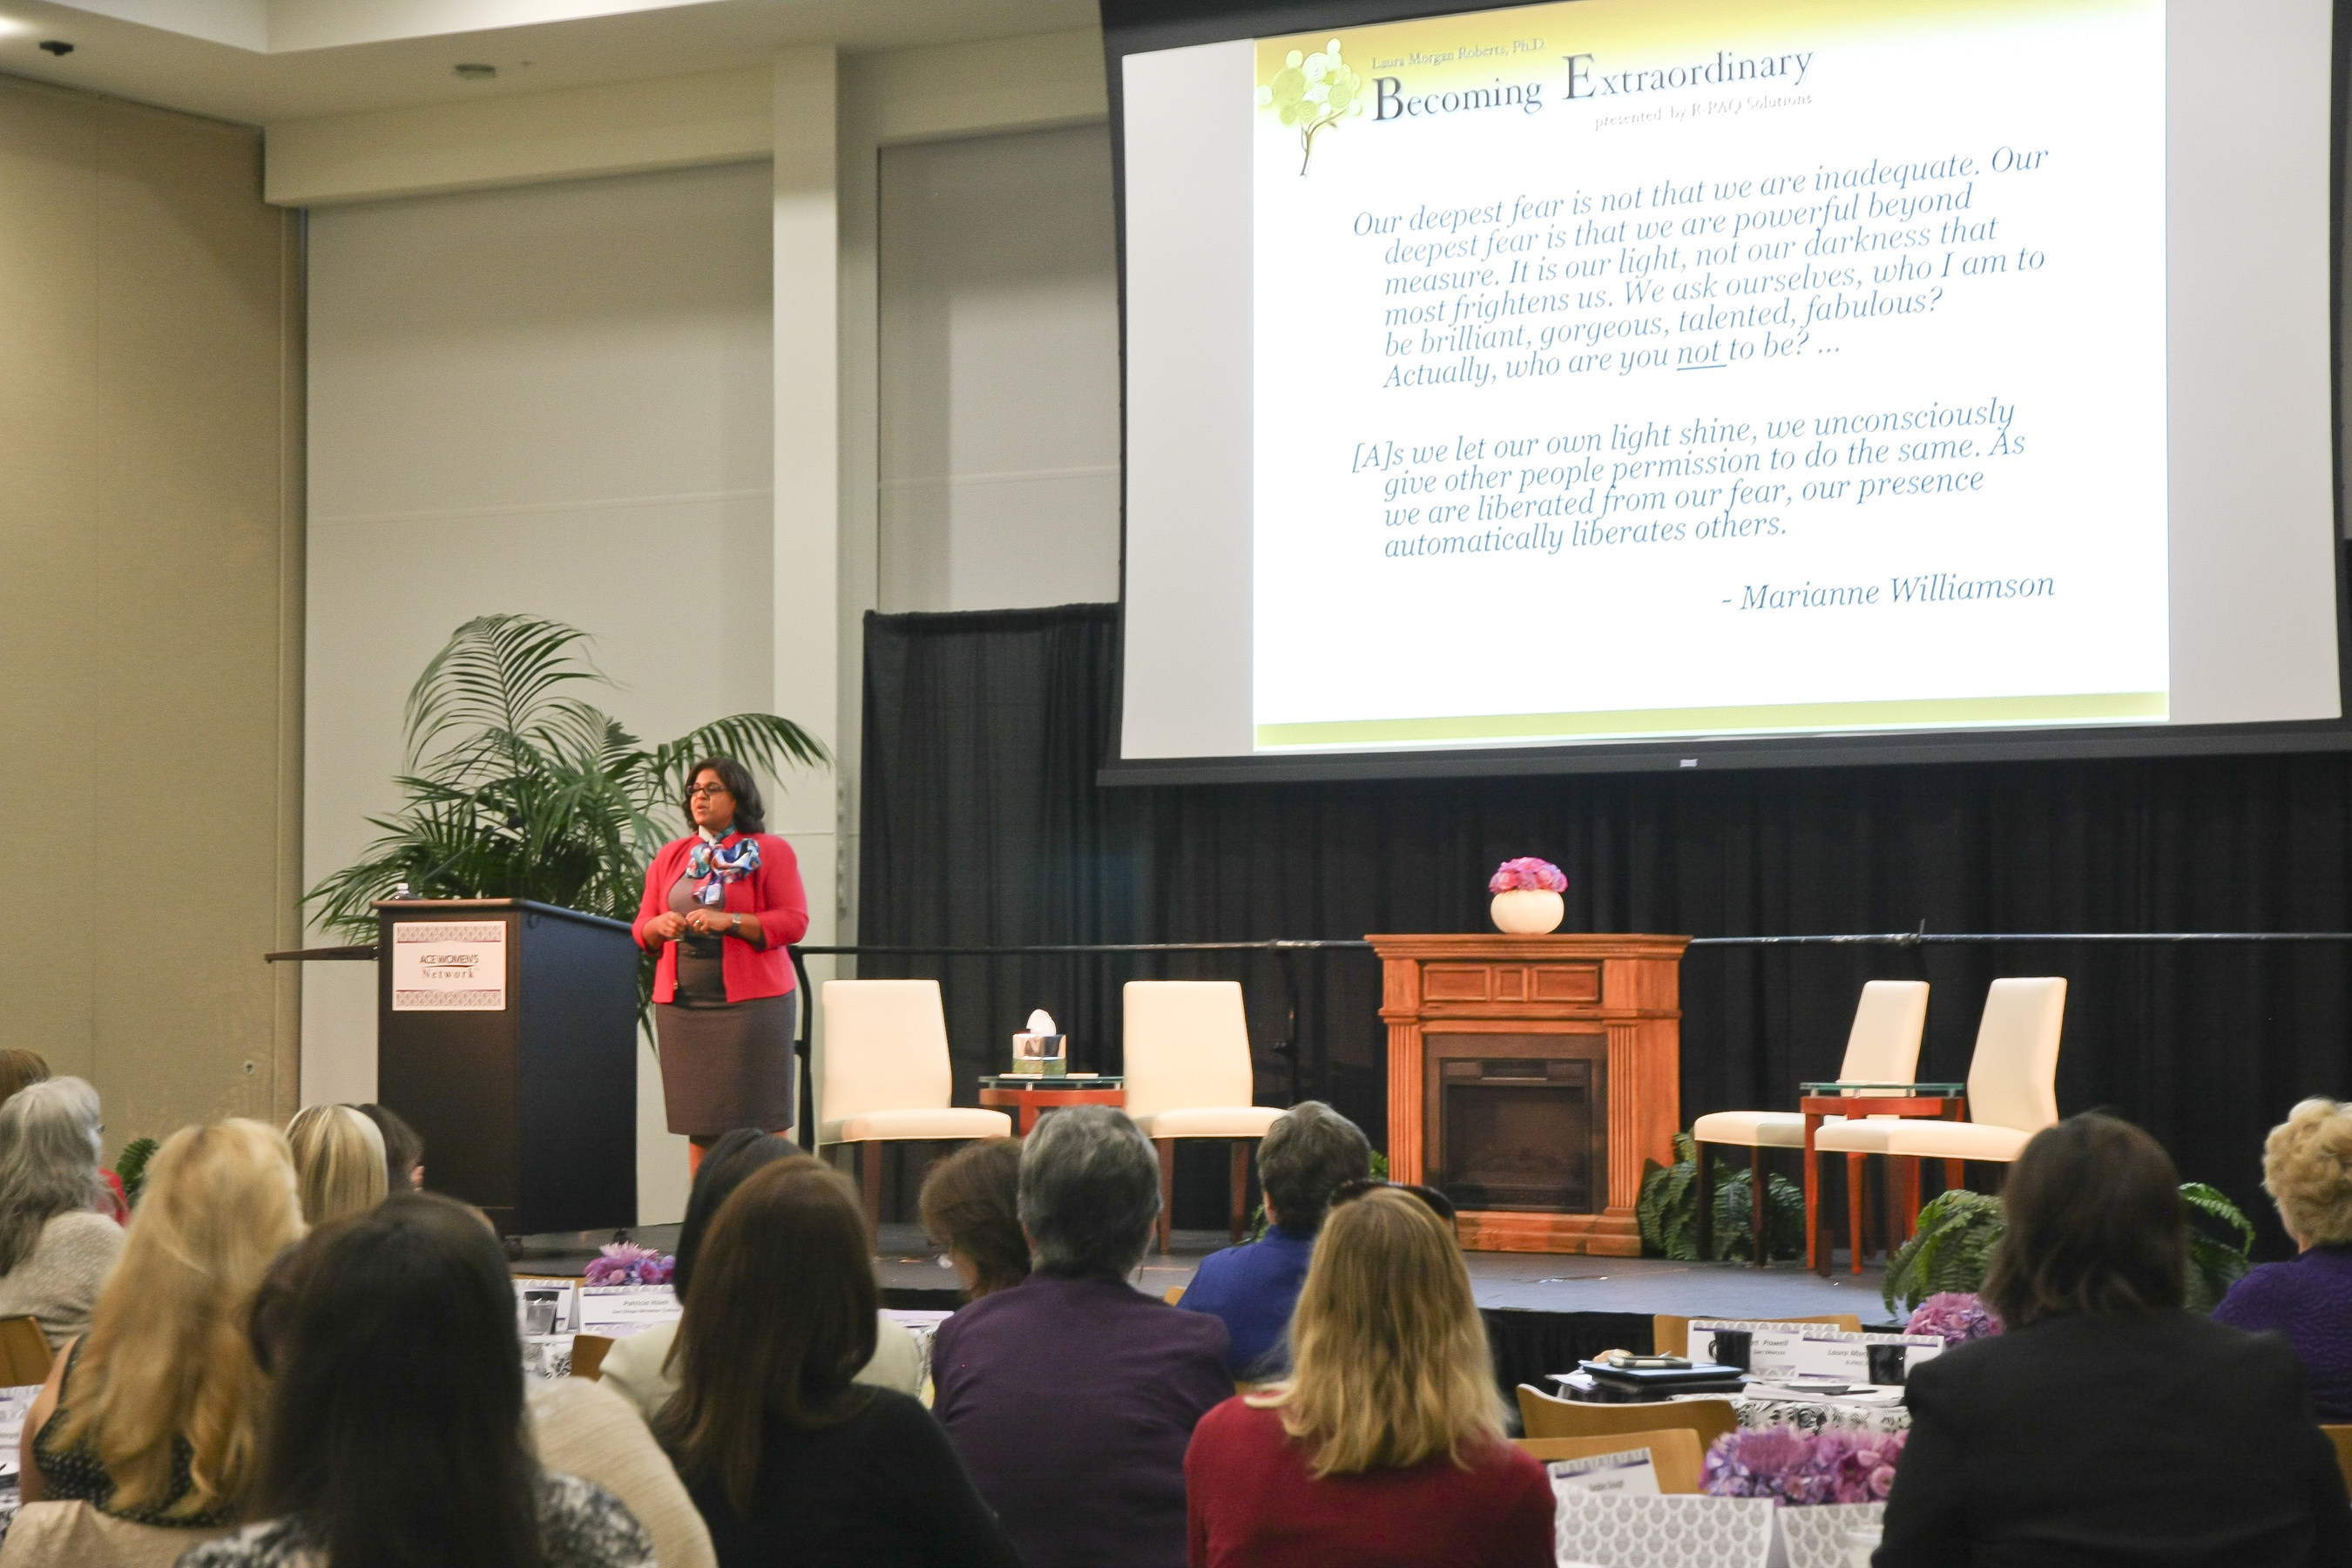 Laura Morgan-Roberts PhD, nationally-known author, professor and organizational consultant, discusses value creation for women in higher education at the annual ACE (American Council on Education) Women's Network Leadership Forum at California State University San Marcos on Friday, October 10. The event, entitled "Be Brave, Be Bold" (#bebravebebold) included over 100 women leaders from public and private colleges and universities throughout Southern California, providing participants with insights on best practices for supporting the advancement of women in higher education.